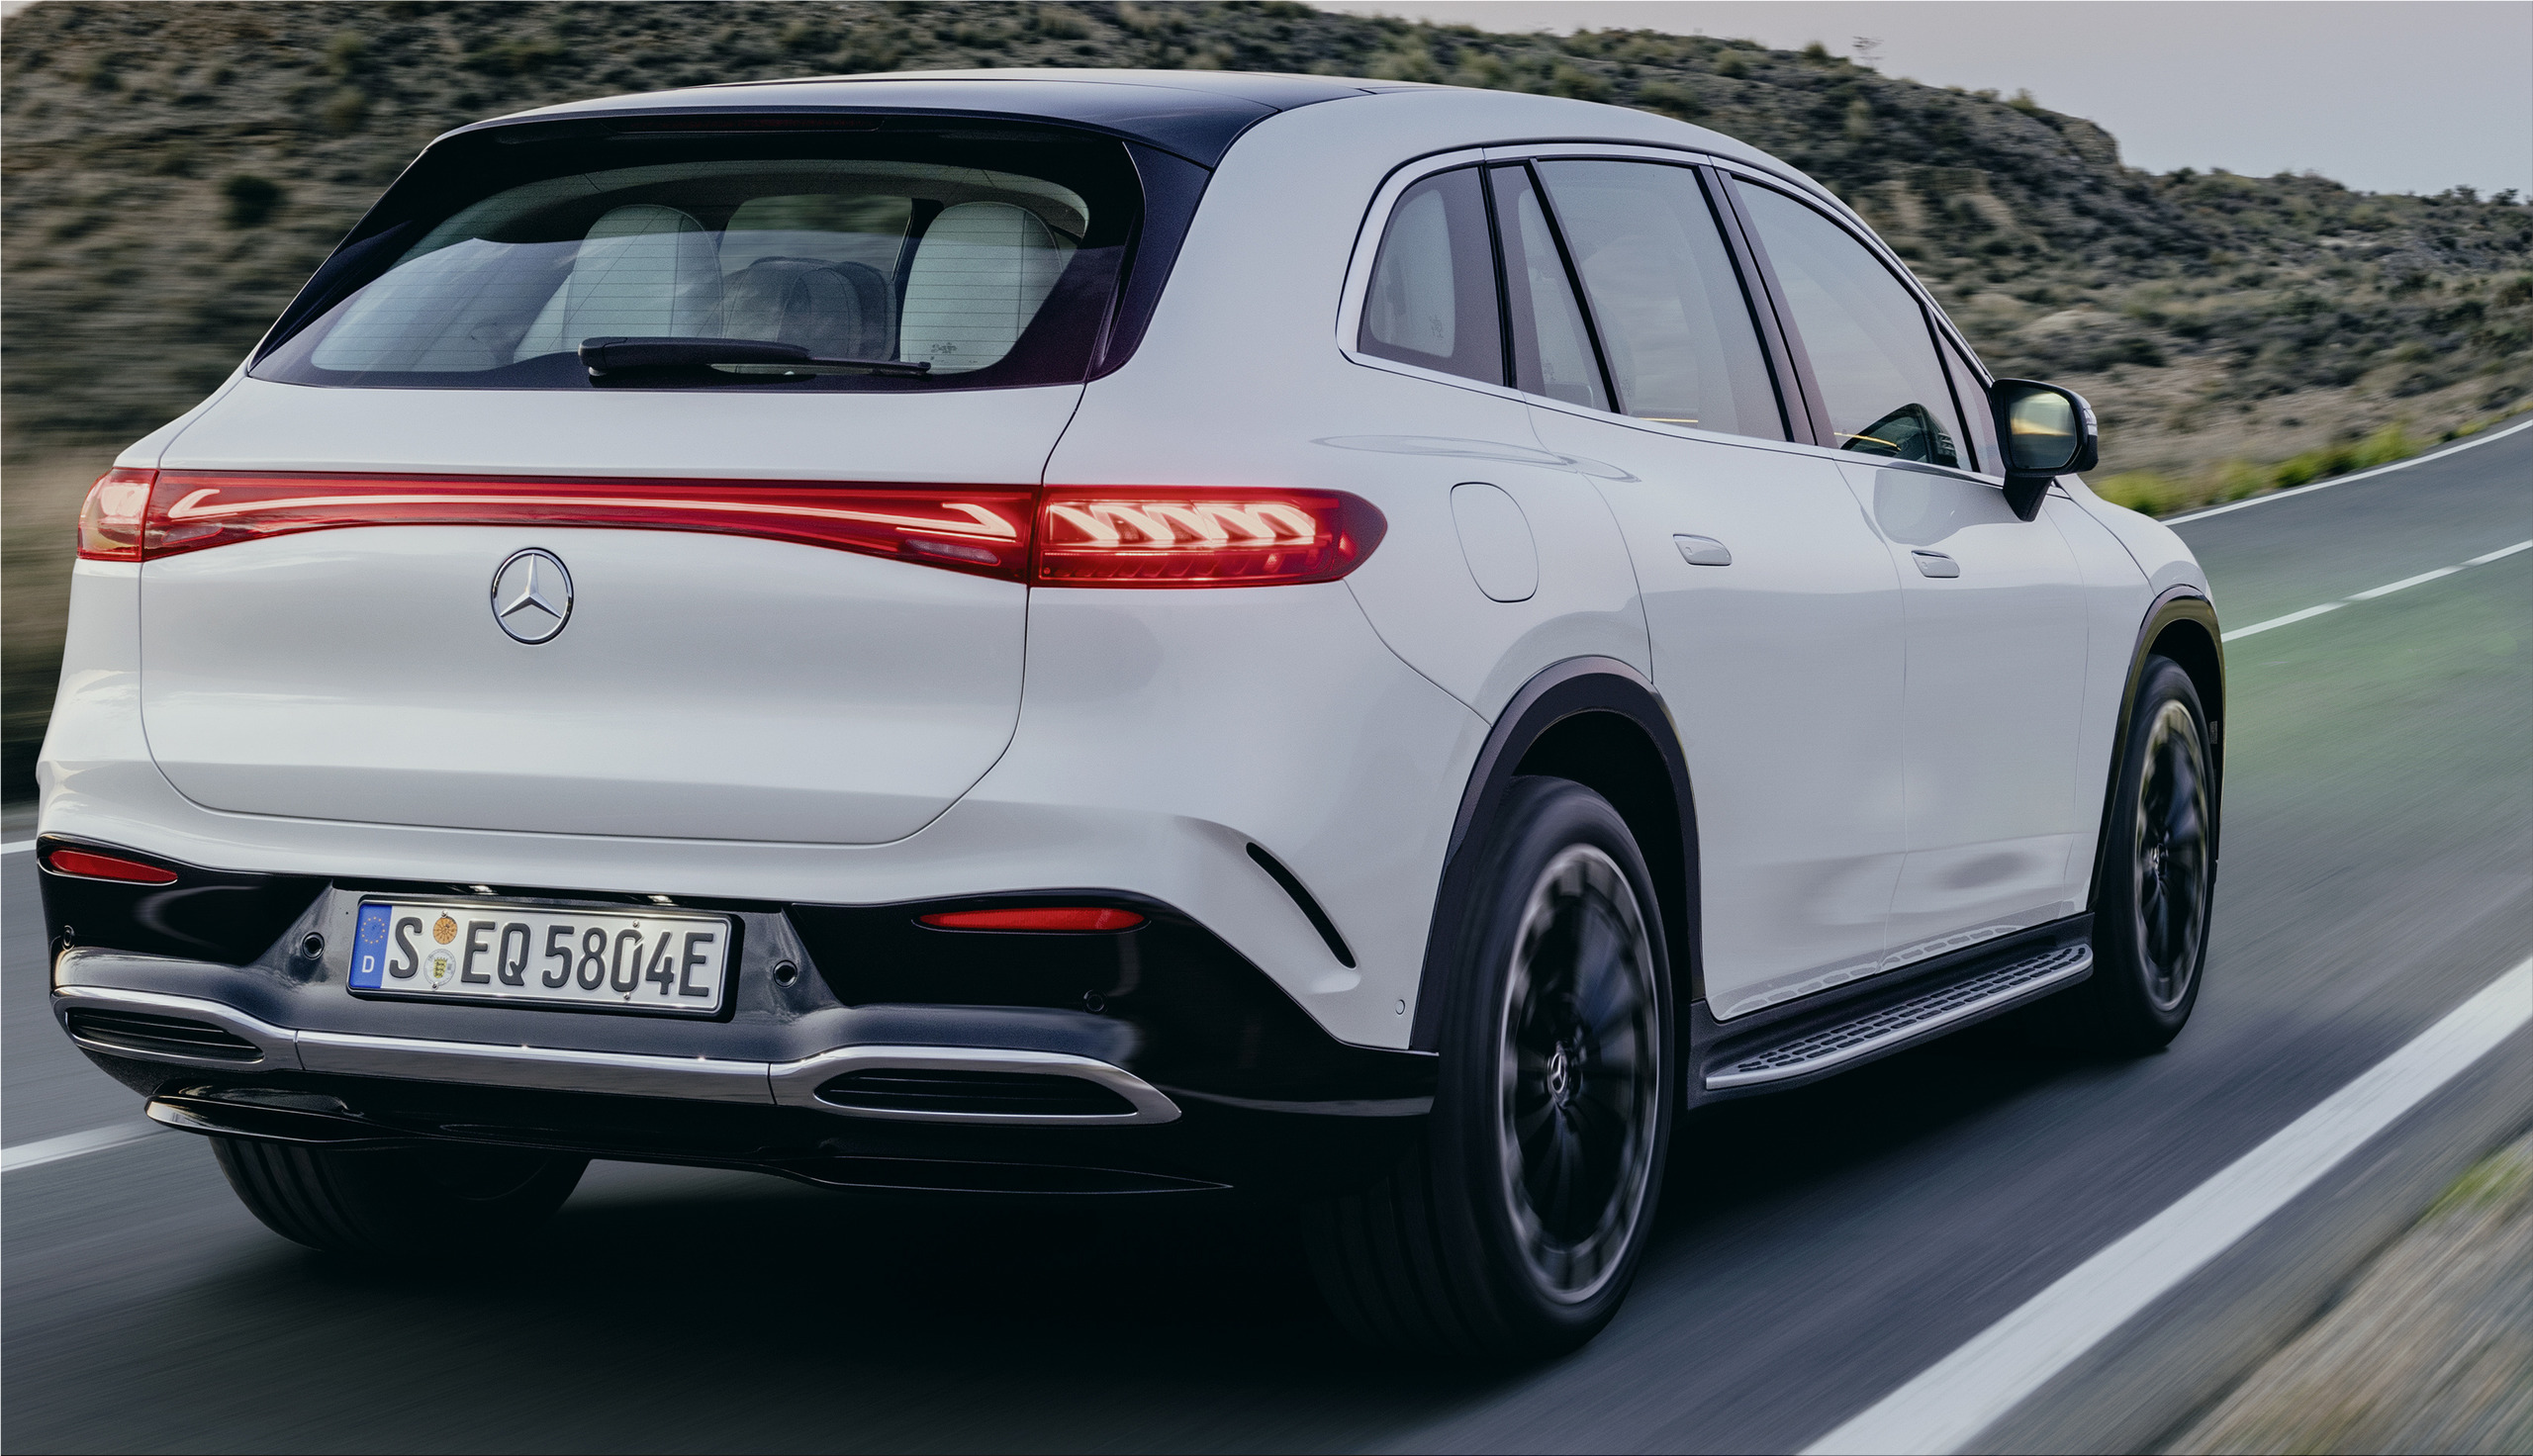 The Mercedes-Benz EQS electric SUV has a starting price of €110,600